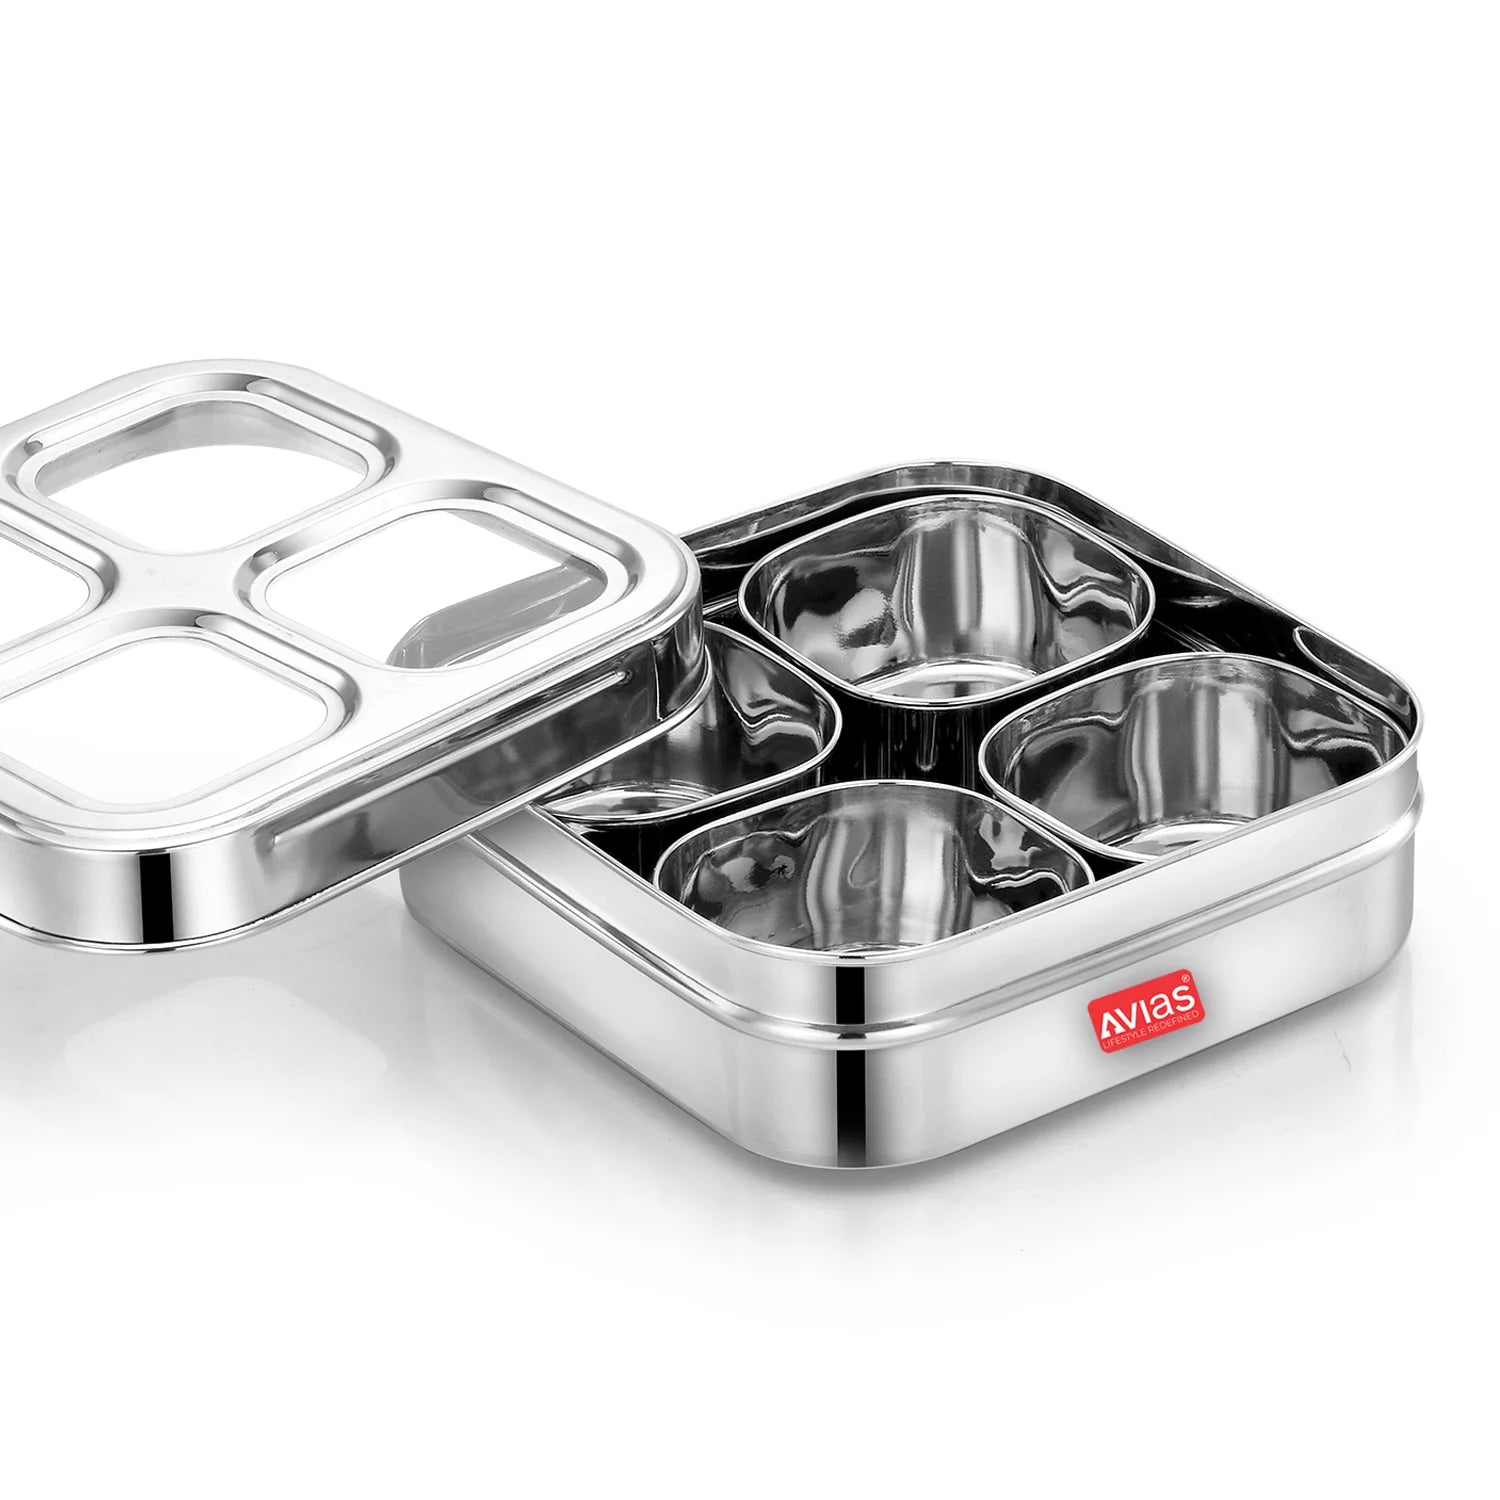 AVIAS 4 Square Stainless Steel Dry Fruit cum Spice box open